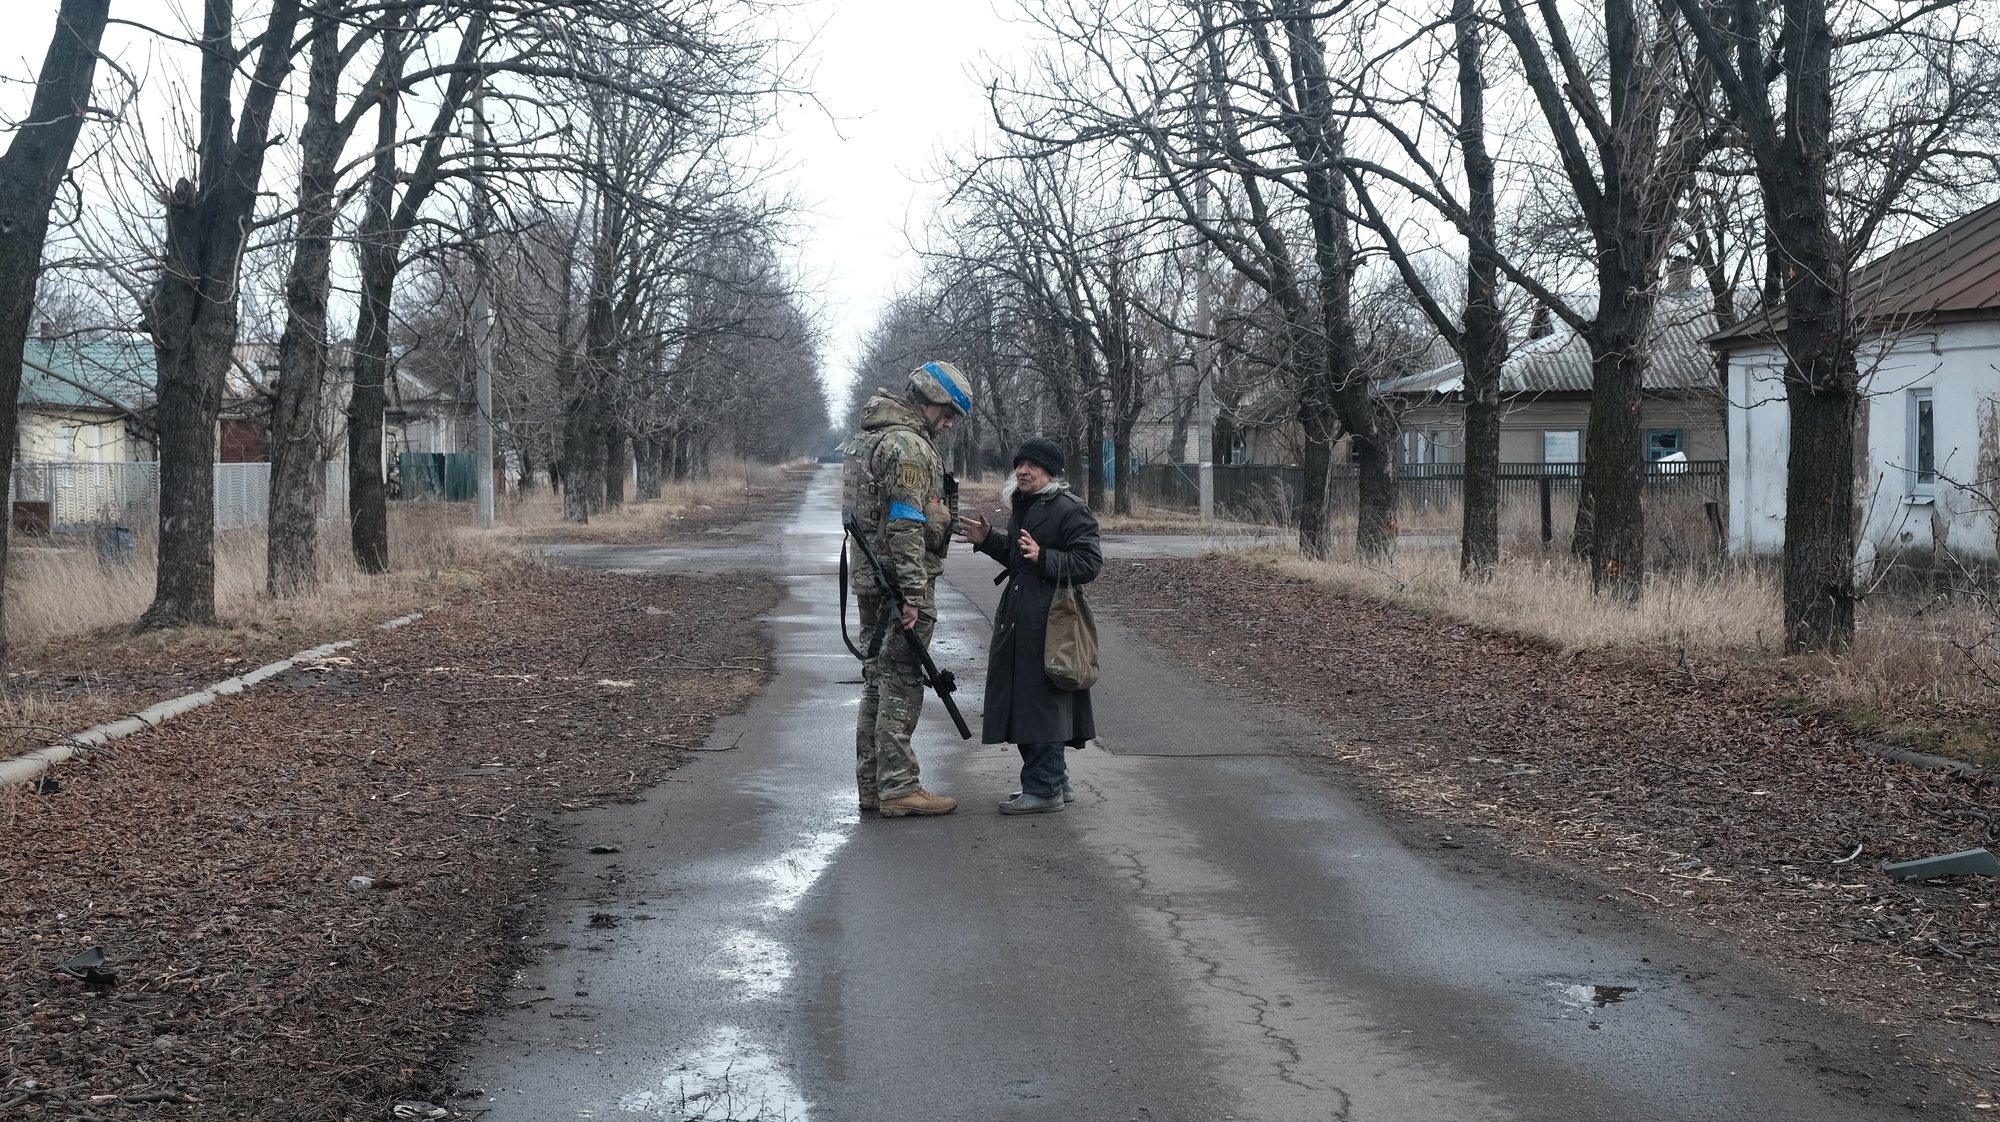 epa10507971 A Ukrainian soldier from the Volyn Detachment speaks to a civilian as he patrols the devastated town of Velyka Novosilka, Donetsk region, Ukraine, 07 March 2023. There are less than 500 people still living in the town, because the Russian positions are less than a kilometer away and the shelling is continuous. Russian troops entered Ukrainian territory on 24 February 2022, starting a conflict that has provoked destruction and a humanitarian crisis.  EPA/MARIASENOVILLA